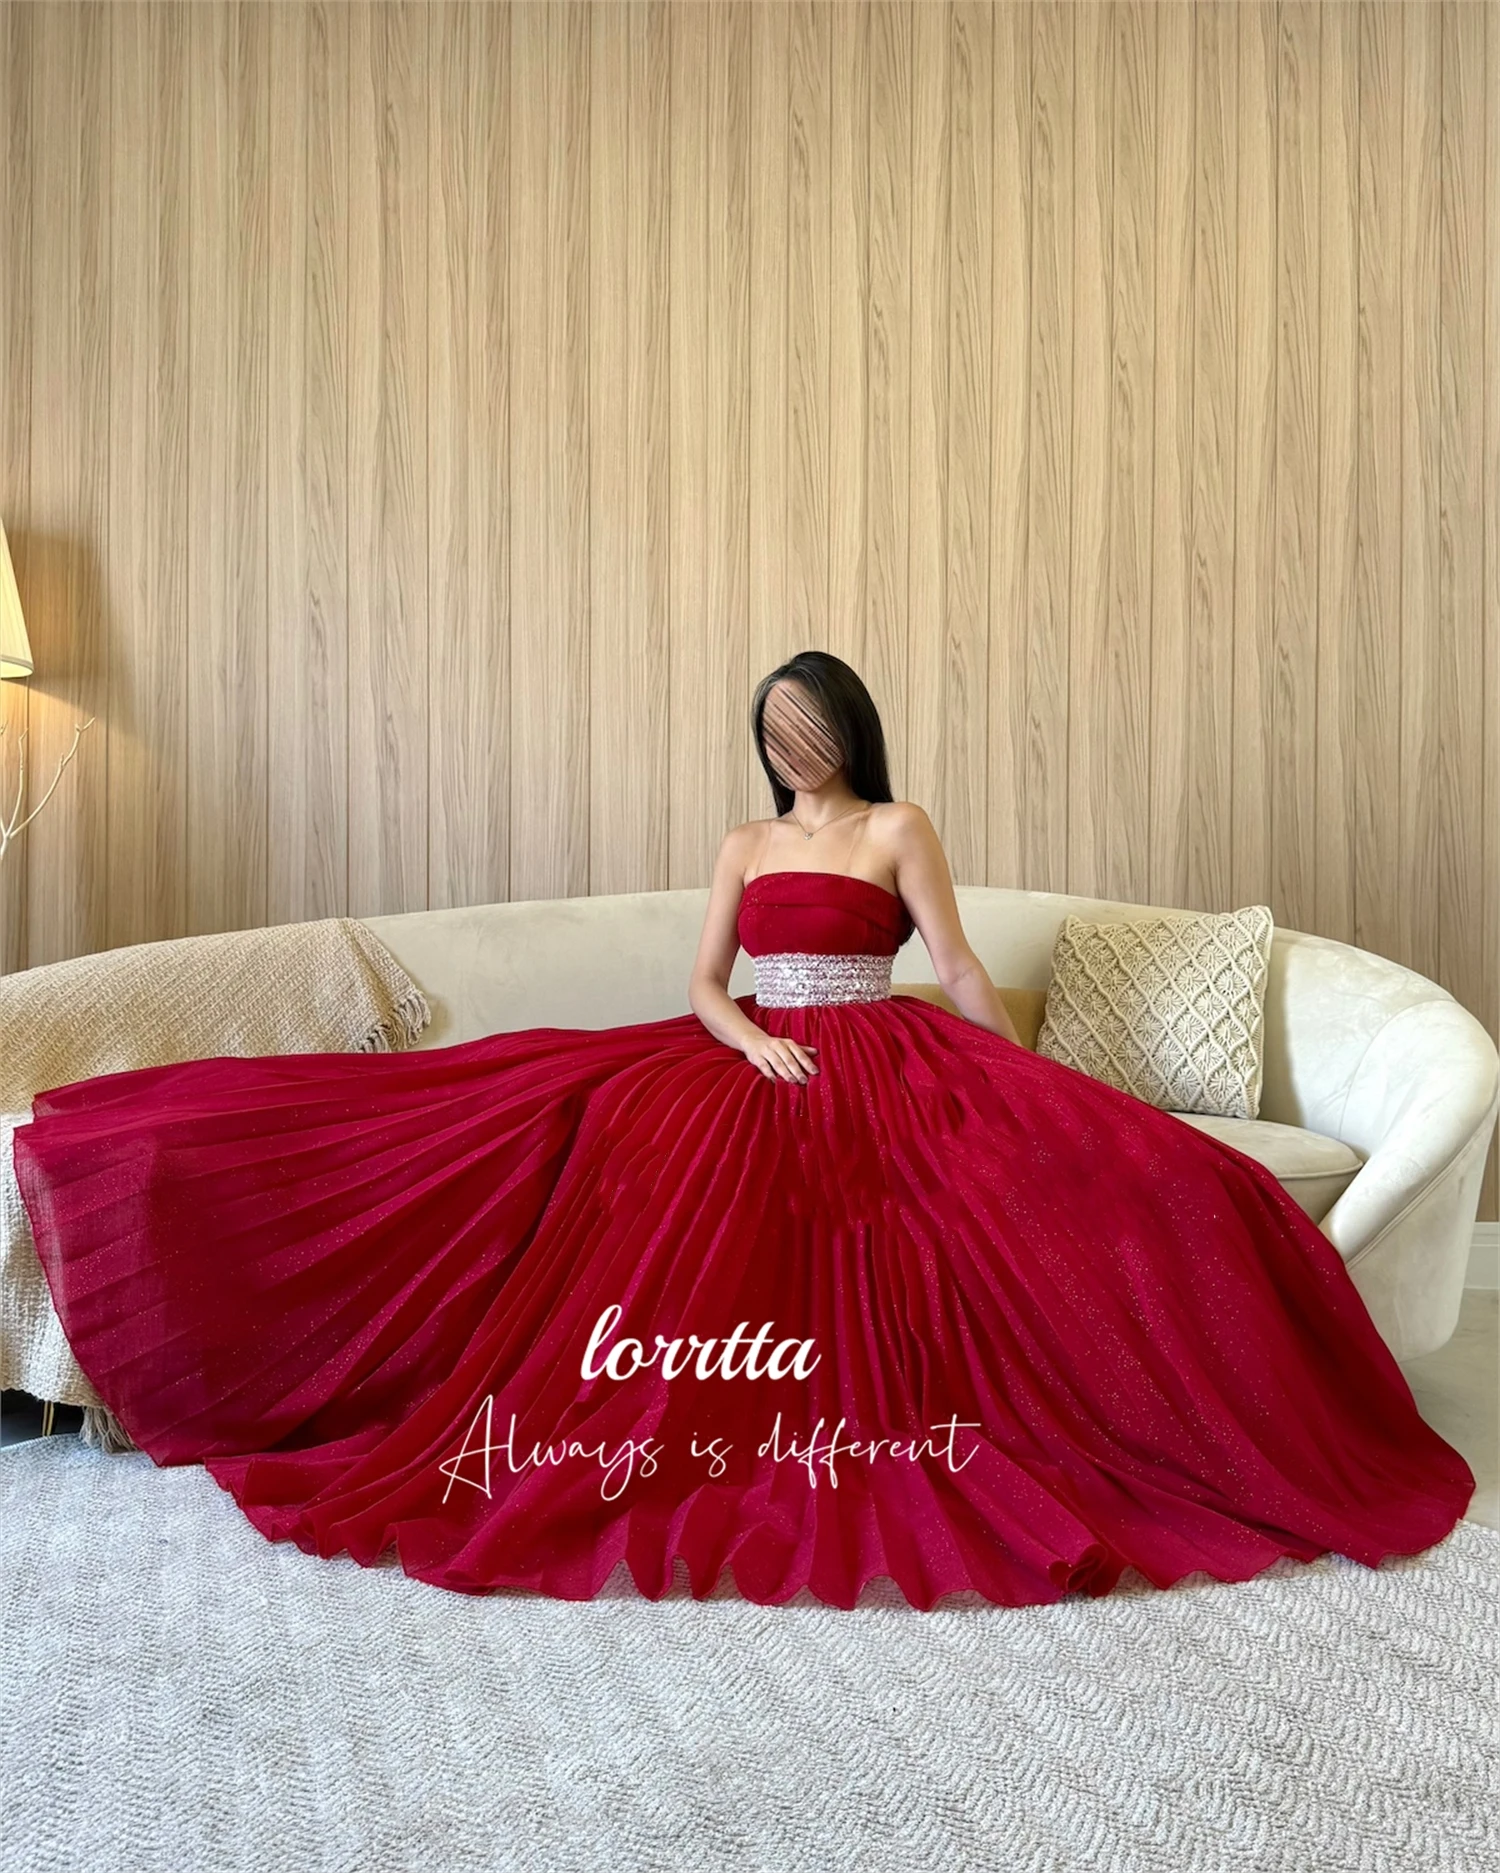 

Lorrtta Ball Gown Red Party Dress Shiny Cocktail of Dresses Evening Long Prom Clothes Gala Gowns Wedding Women's Woman Saudi New